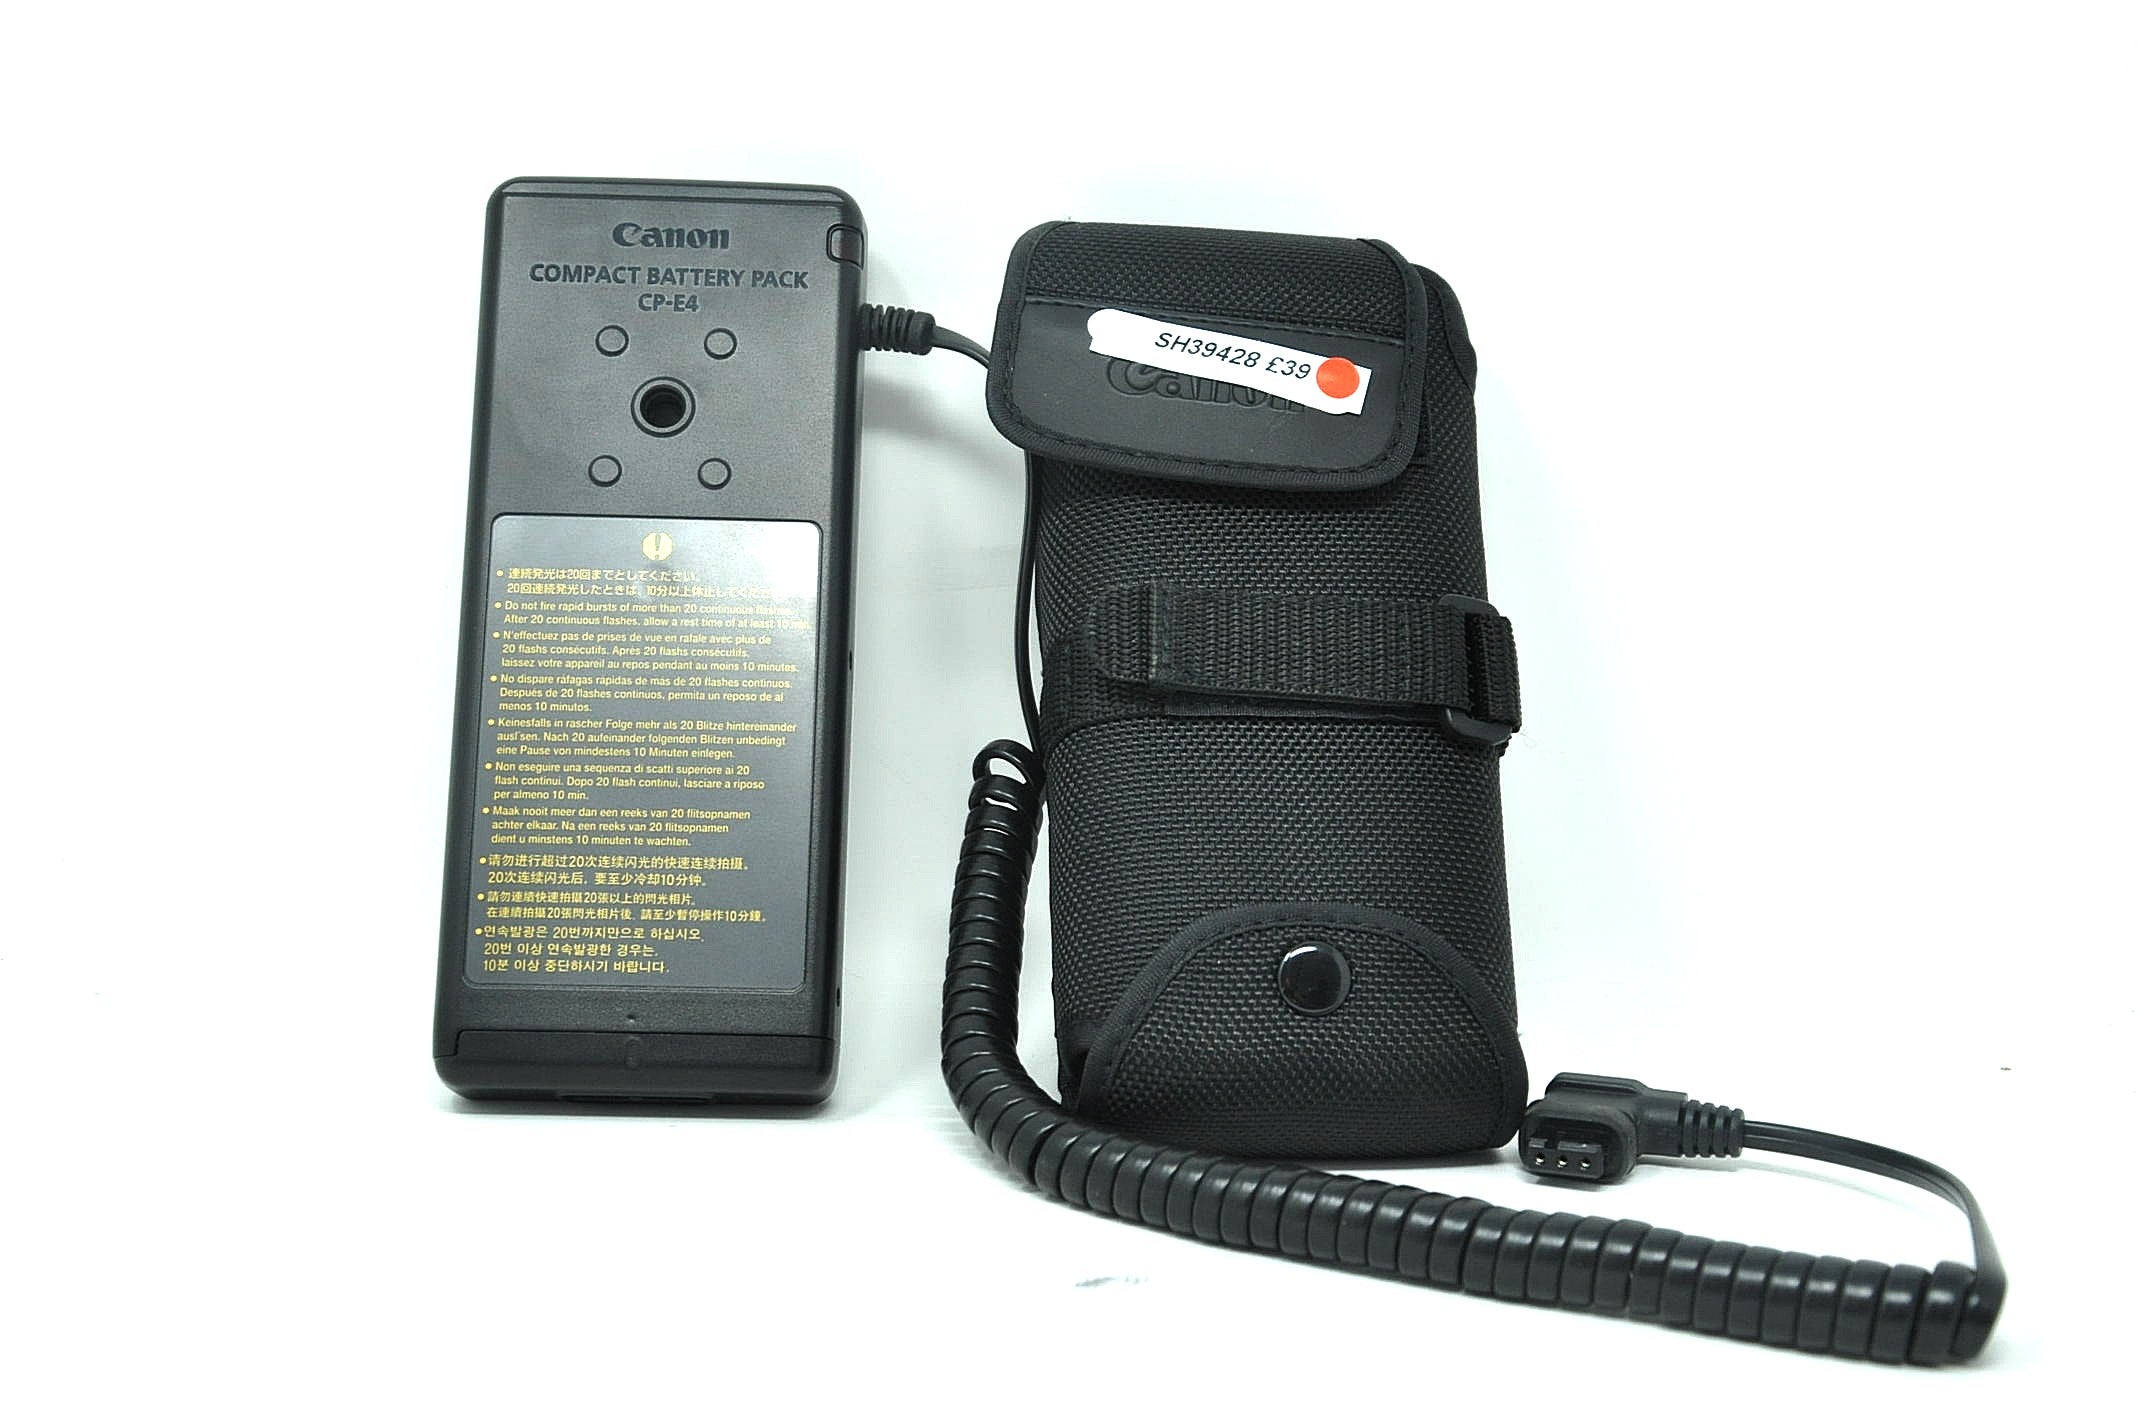 Used Canon CP-E4 Battery pack for Canon Flashguns (Case SH39428)